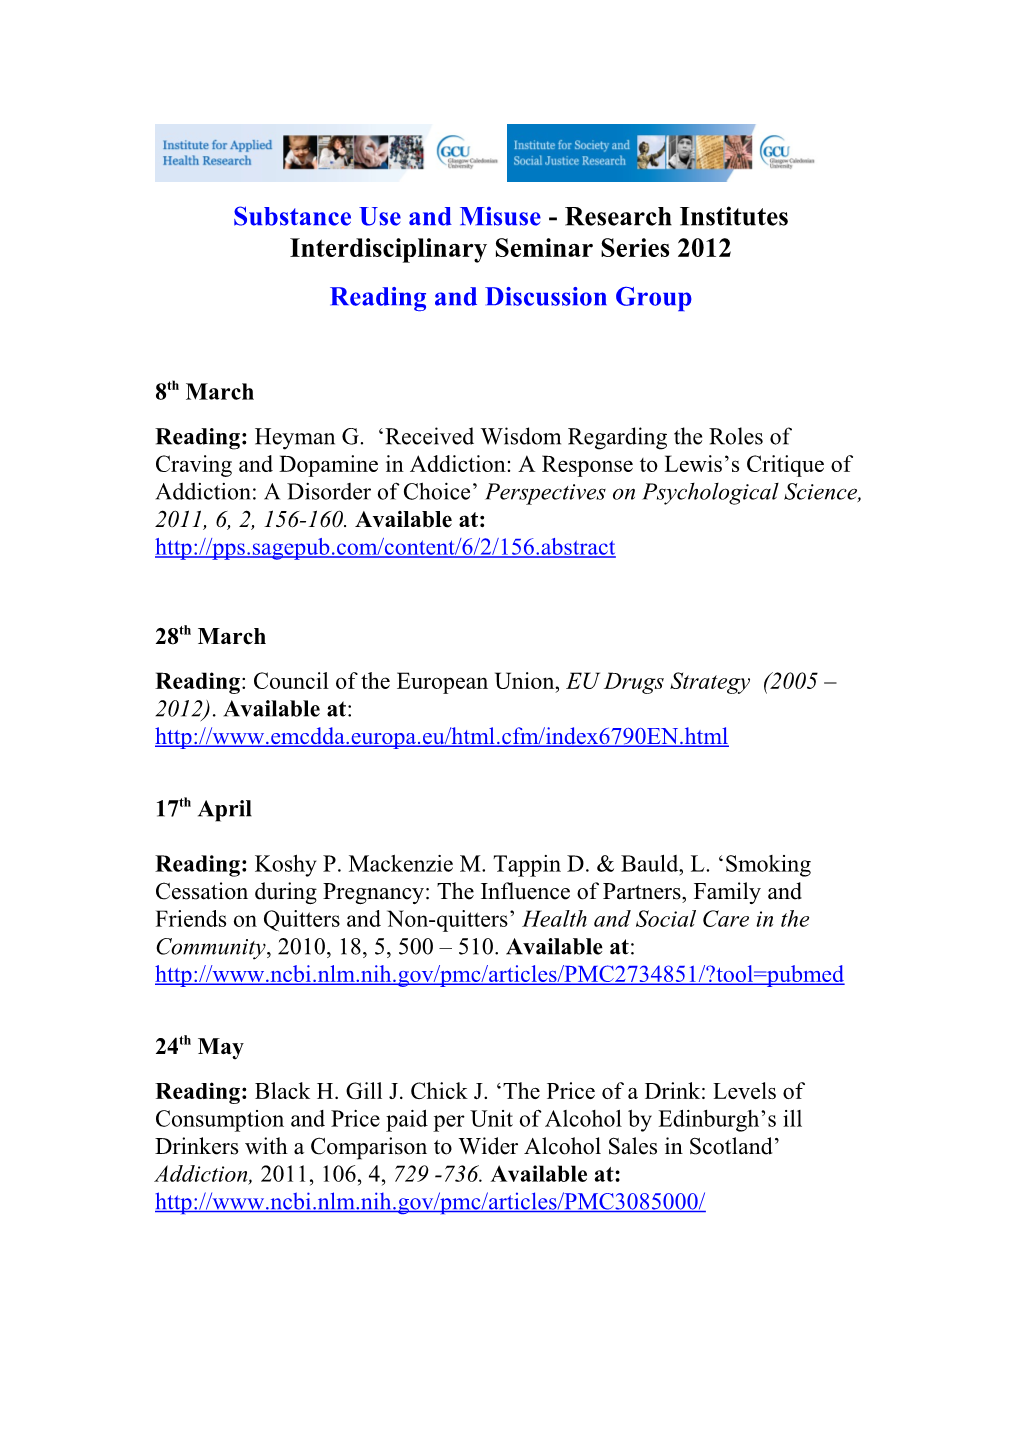 Substance Use and Misuse - Research Institutes Interdisciplinary Seminarseries 2012